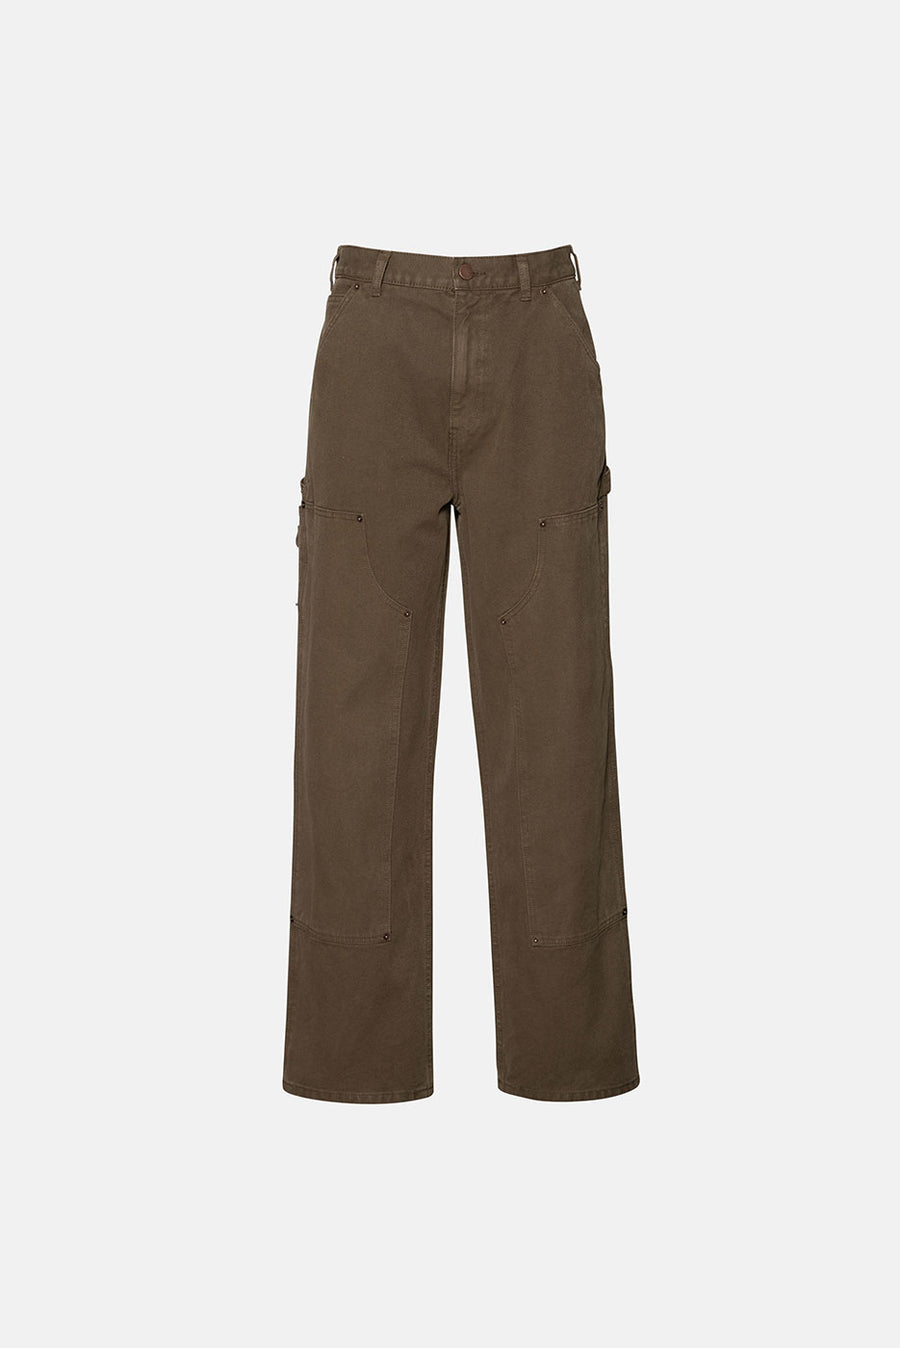 INDUSTRY PANT